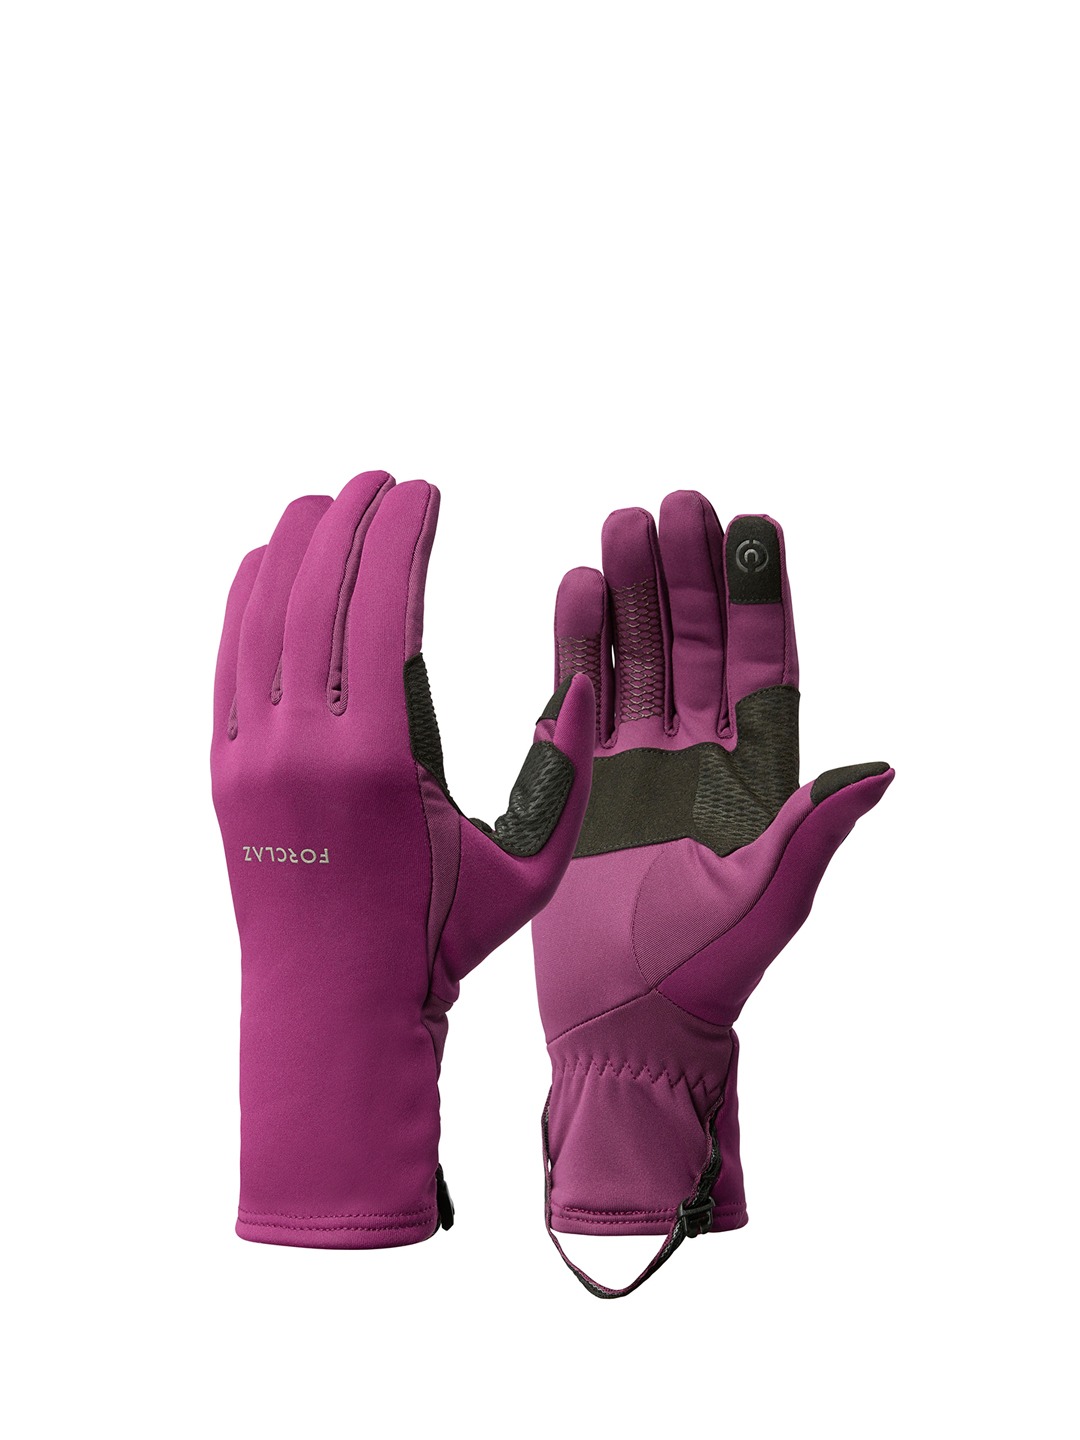 Accessories Gloves | FORCLAZ By Decathlon Purple Breathable Mountain Trekking Gloves - ZH83143